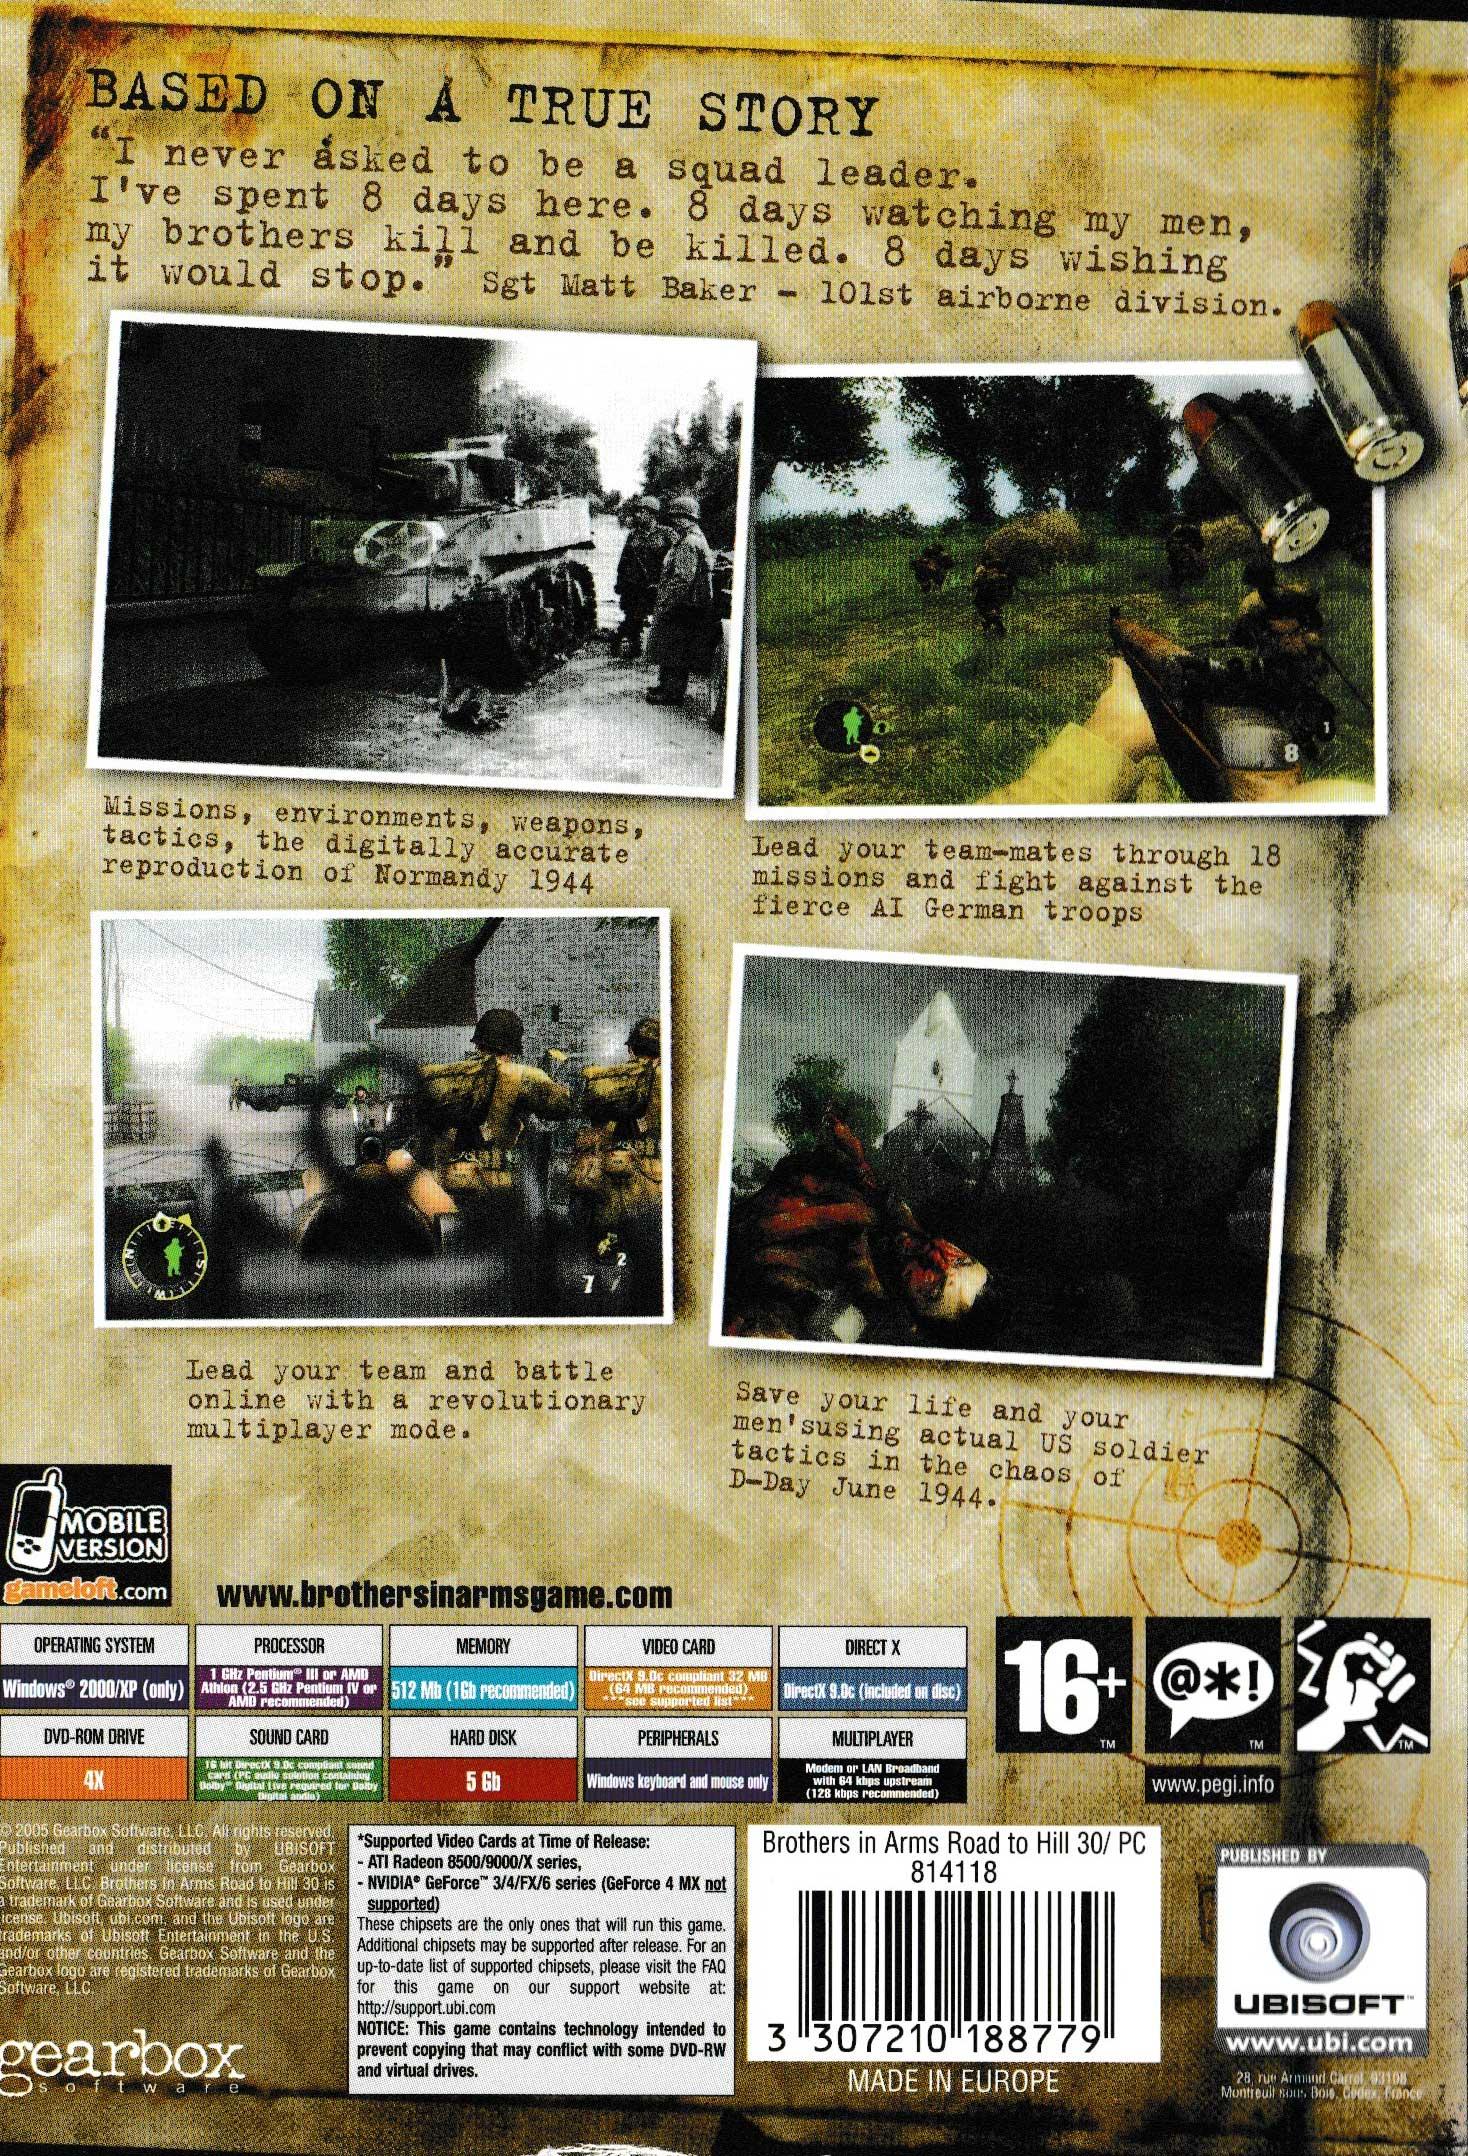 Brothers In Arms Road To Hill 30 - Classic Windows PC Game